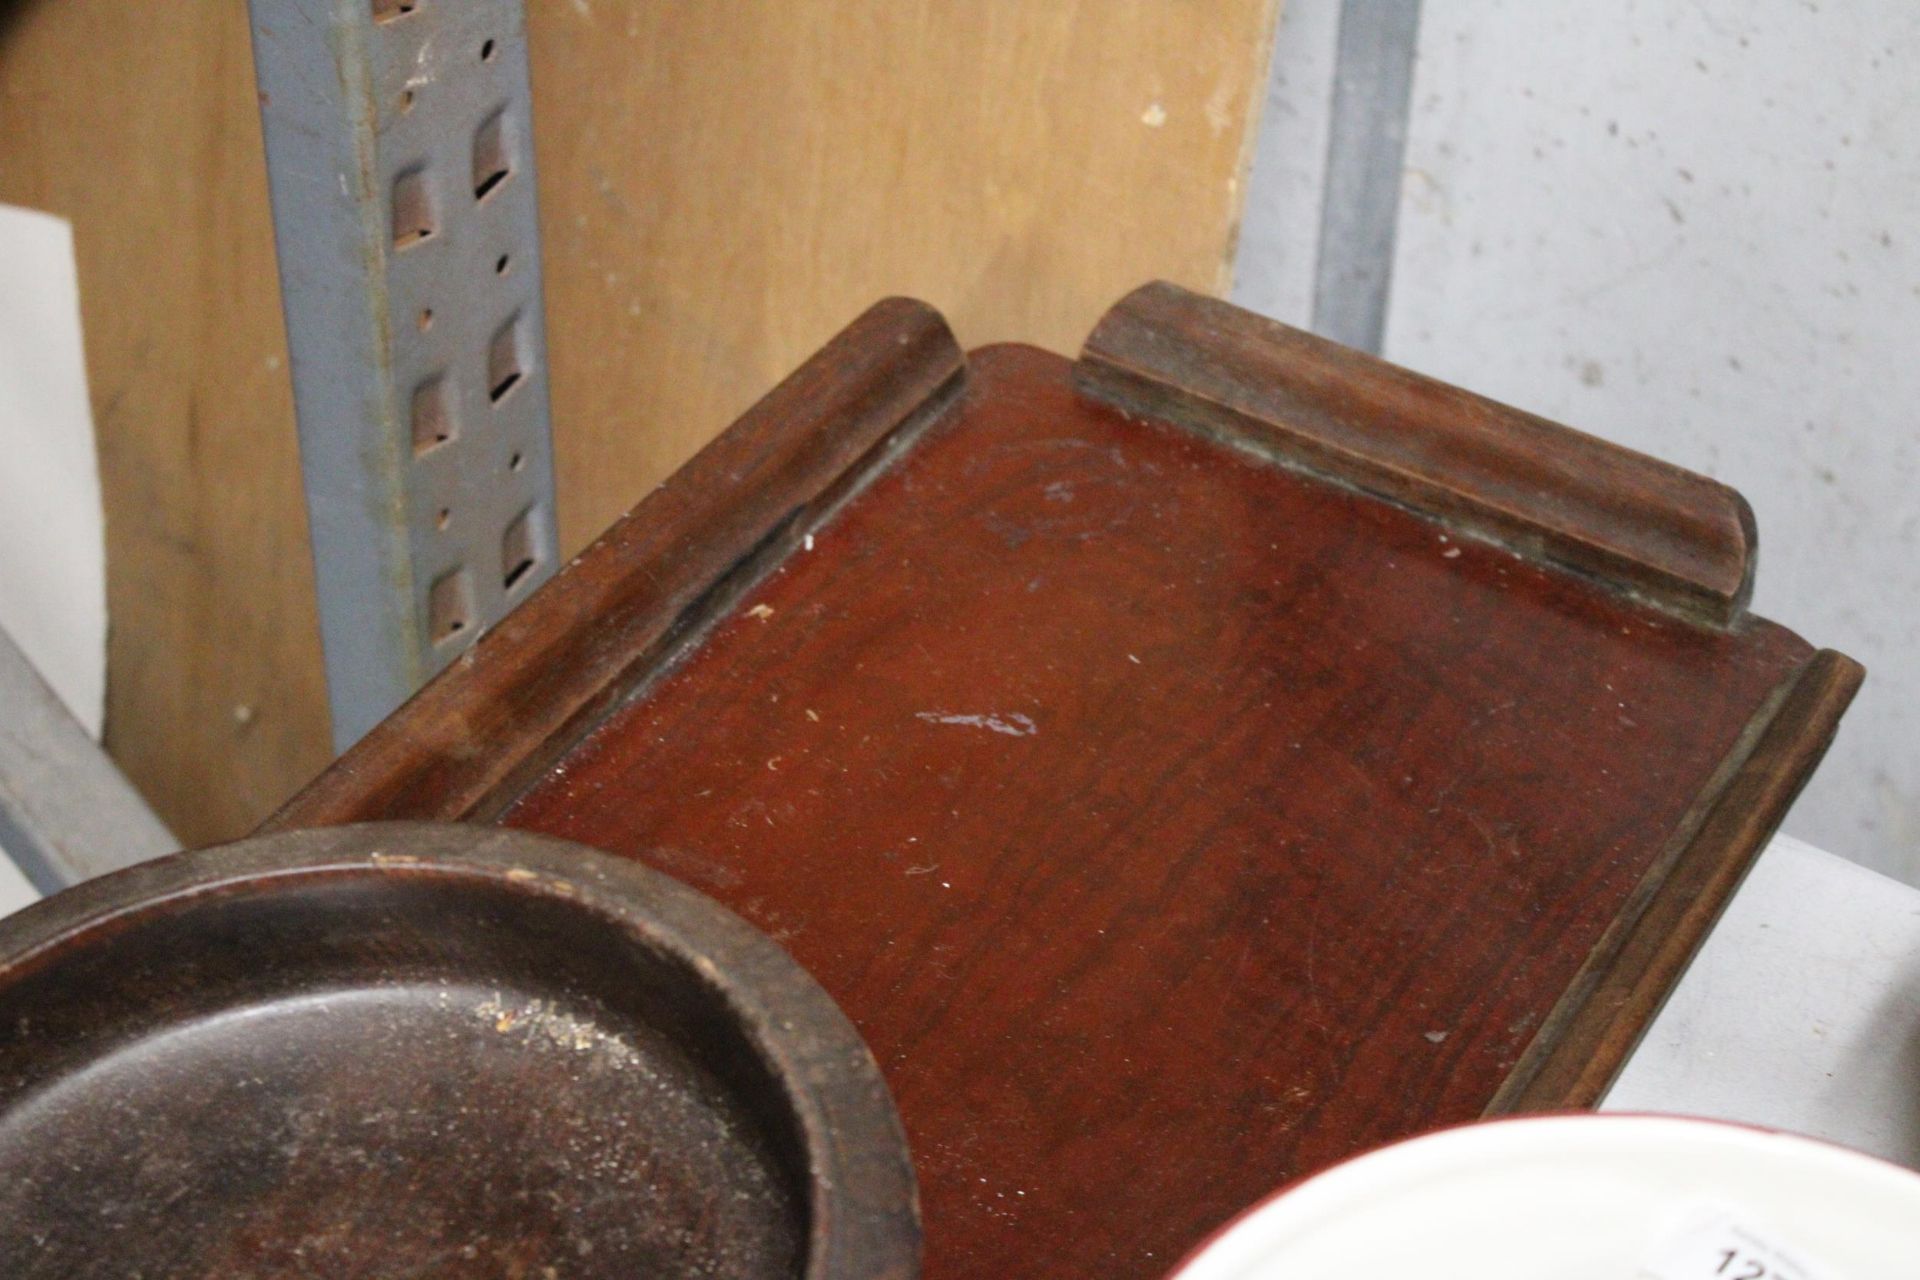 TWO VINTAGE WOODEN TRAYS, ONE WITH CARVED EDGES PLUS A MAHOGANY BOWL ON BUN FEET - Image 4 of 4